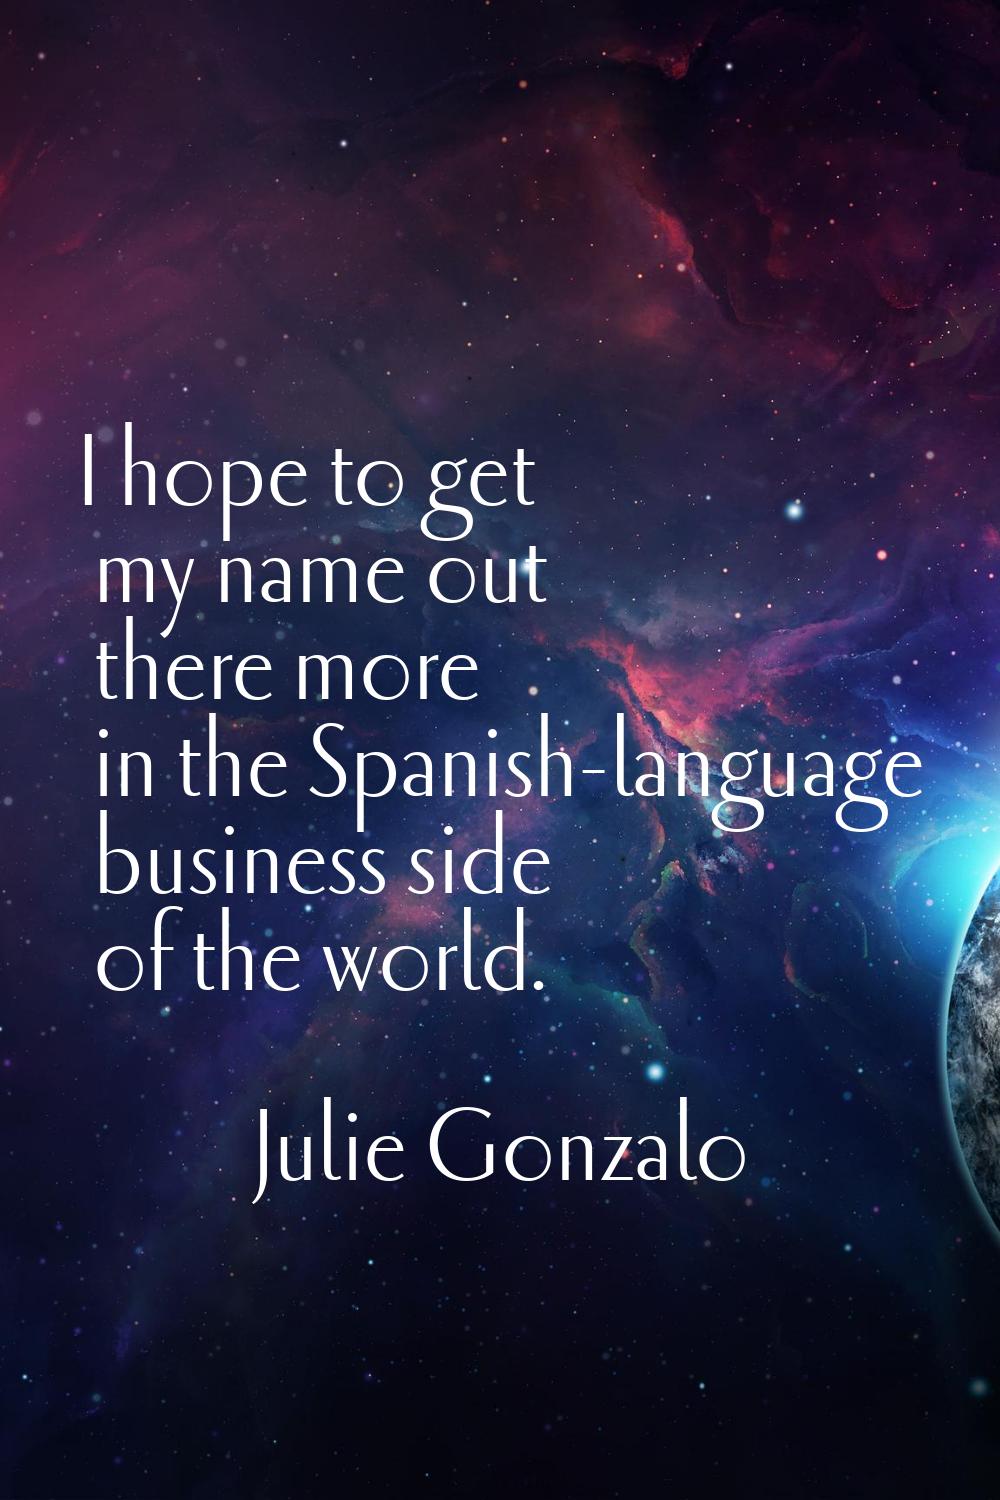 I hope to get my name out there more in the Spanish-language business side of the world.